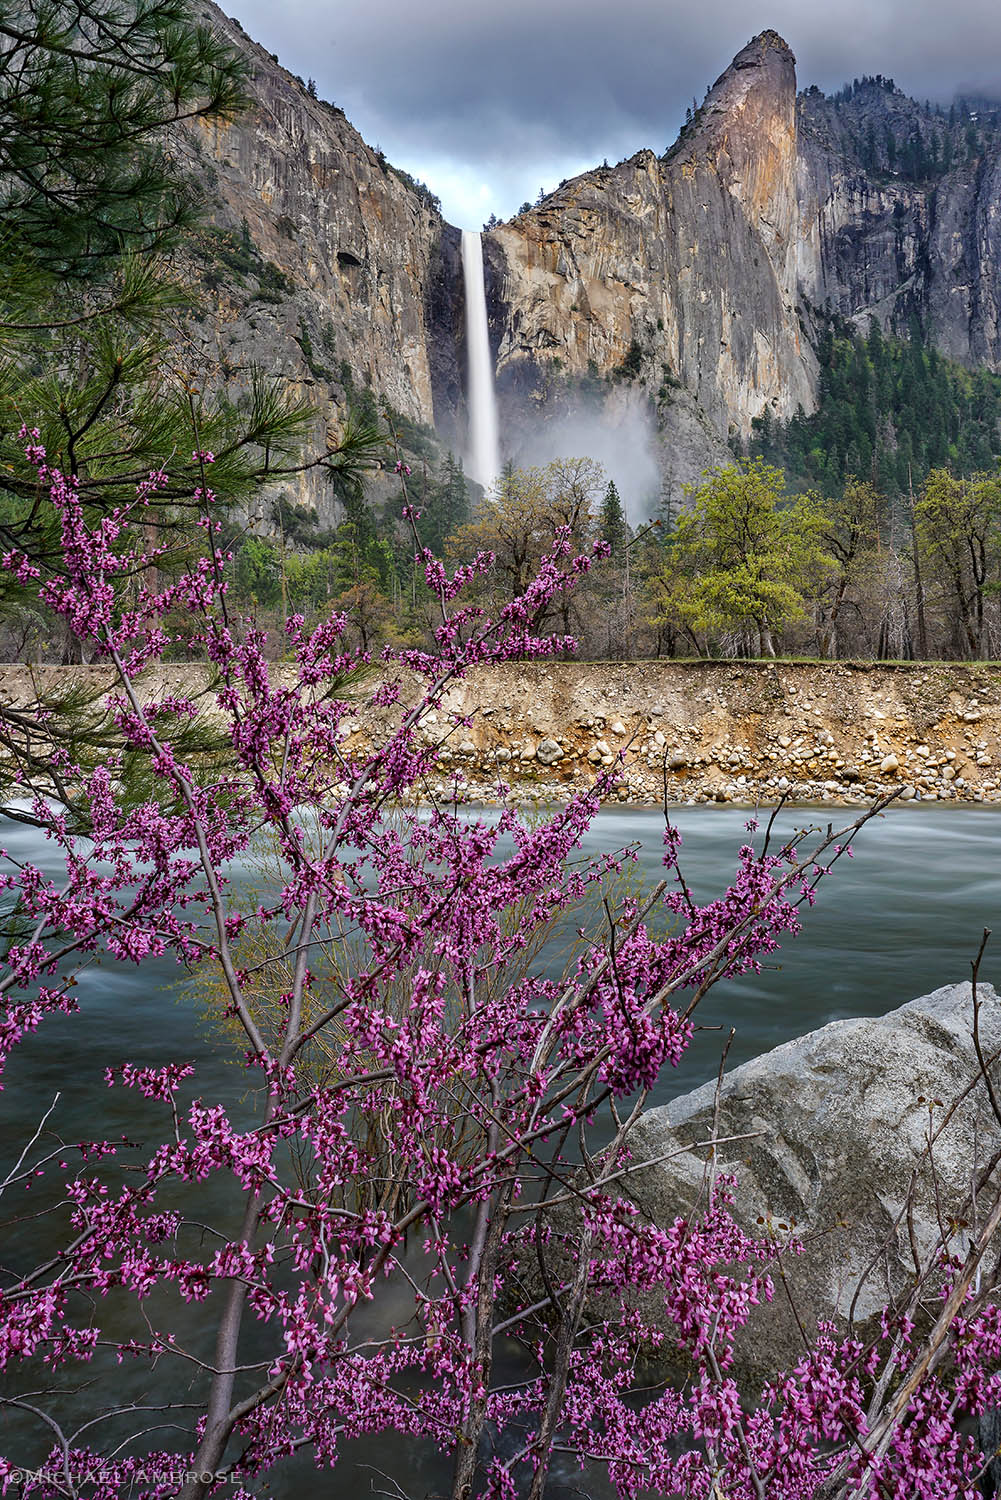 Bridalveil Fall of Yosemite Valley rushes full into the Merced River lined with blooming redbuds.